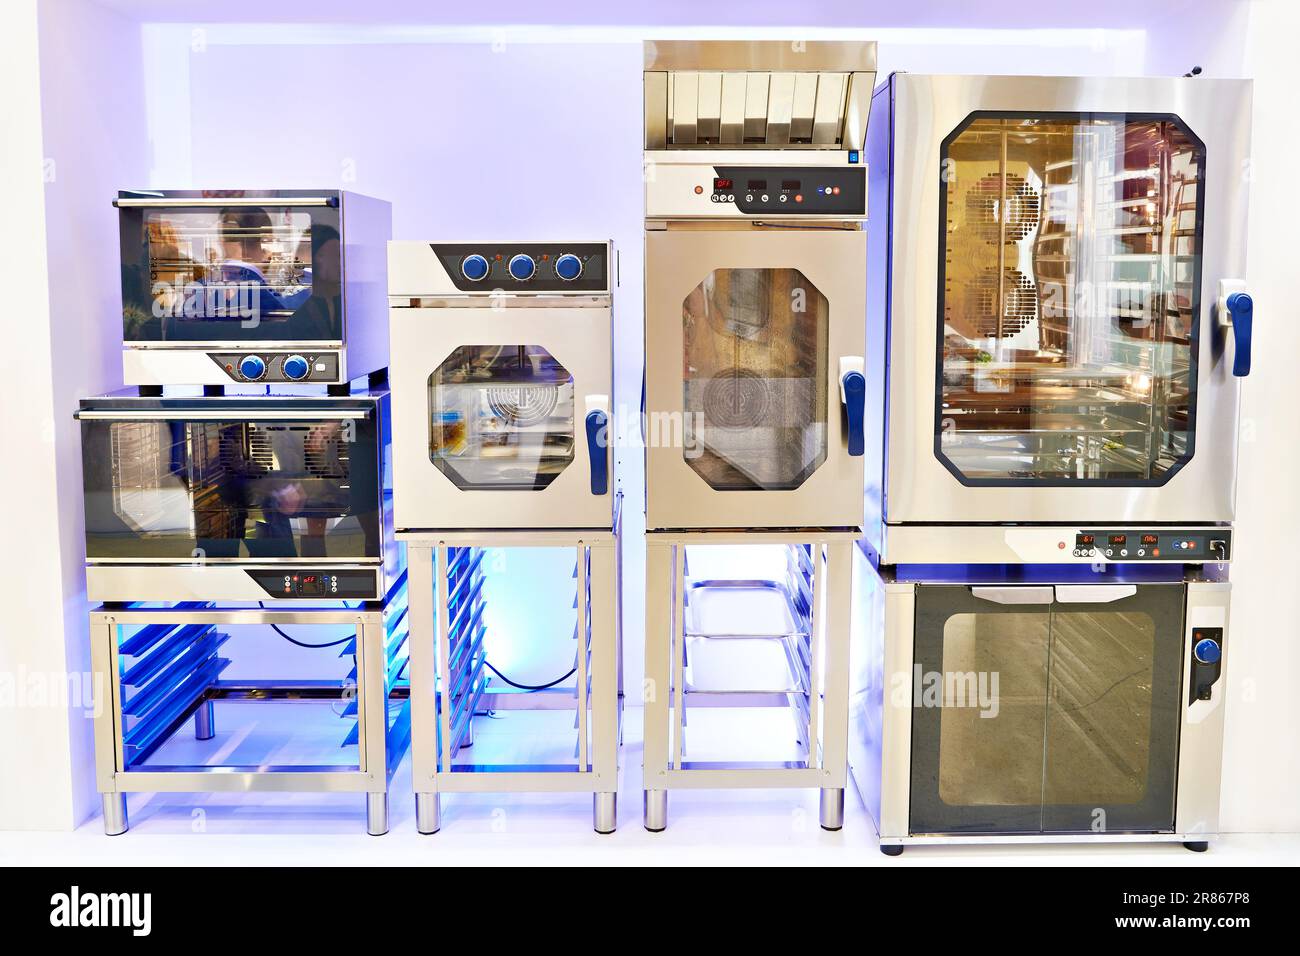 Steam convection ovens on exhibition Stock Photo